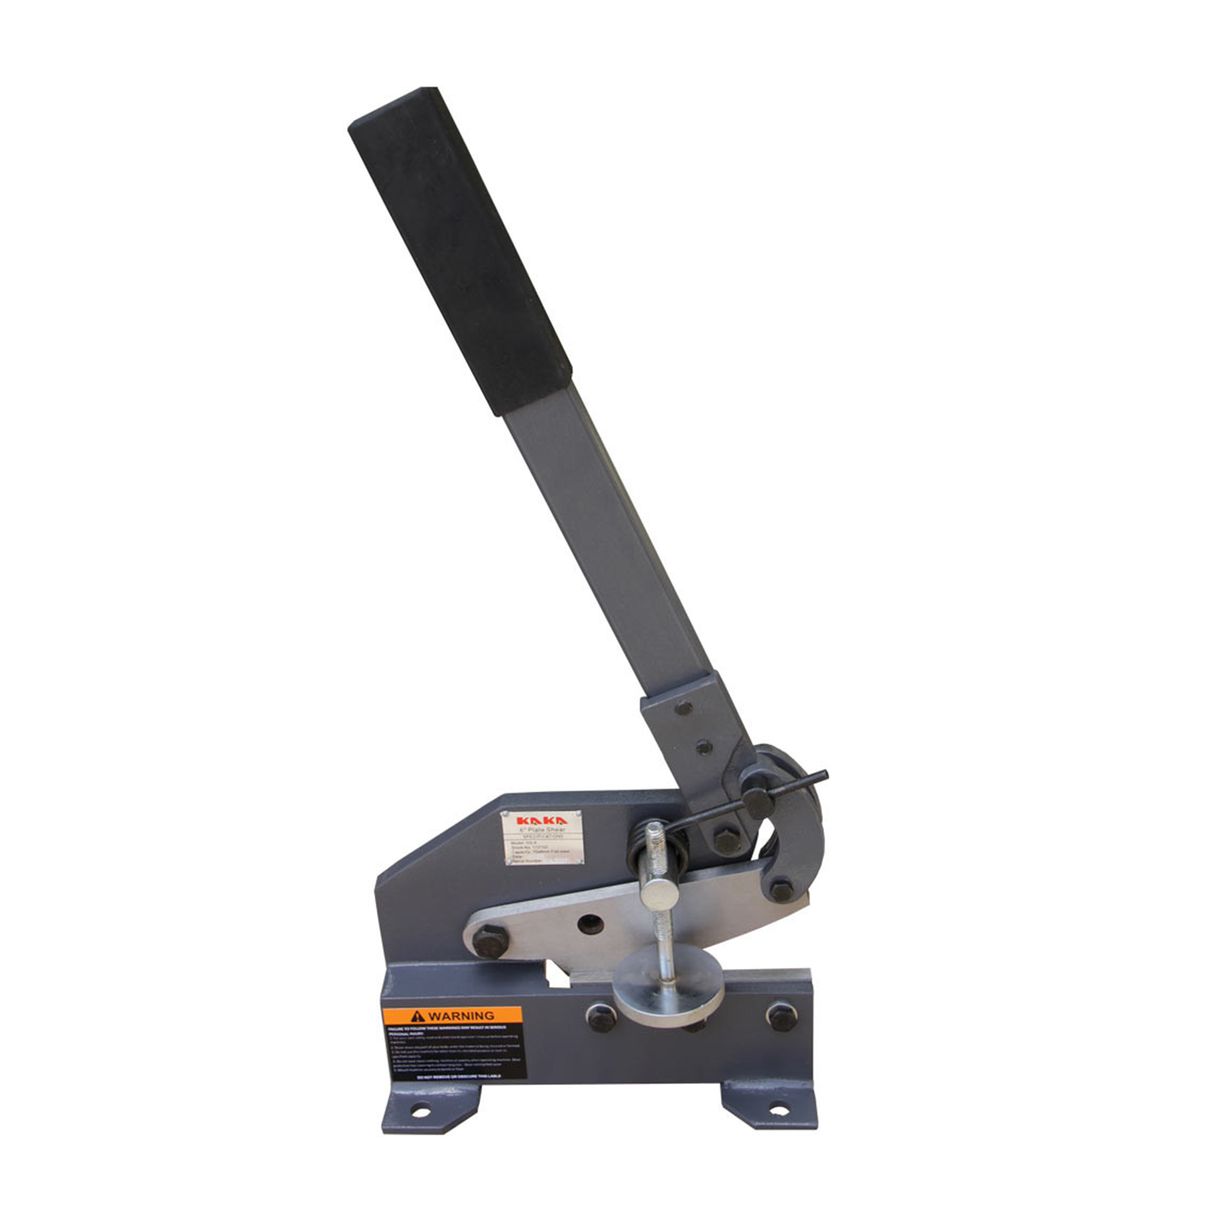 KANG Industrial HS-6 150mm Sheet Metal Plate Shear, Mounting Type Metal Shear, For Cutting Sheets and Bars, High Precision Manual Hand Plate Shear